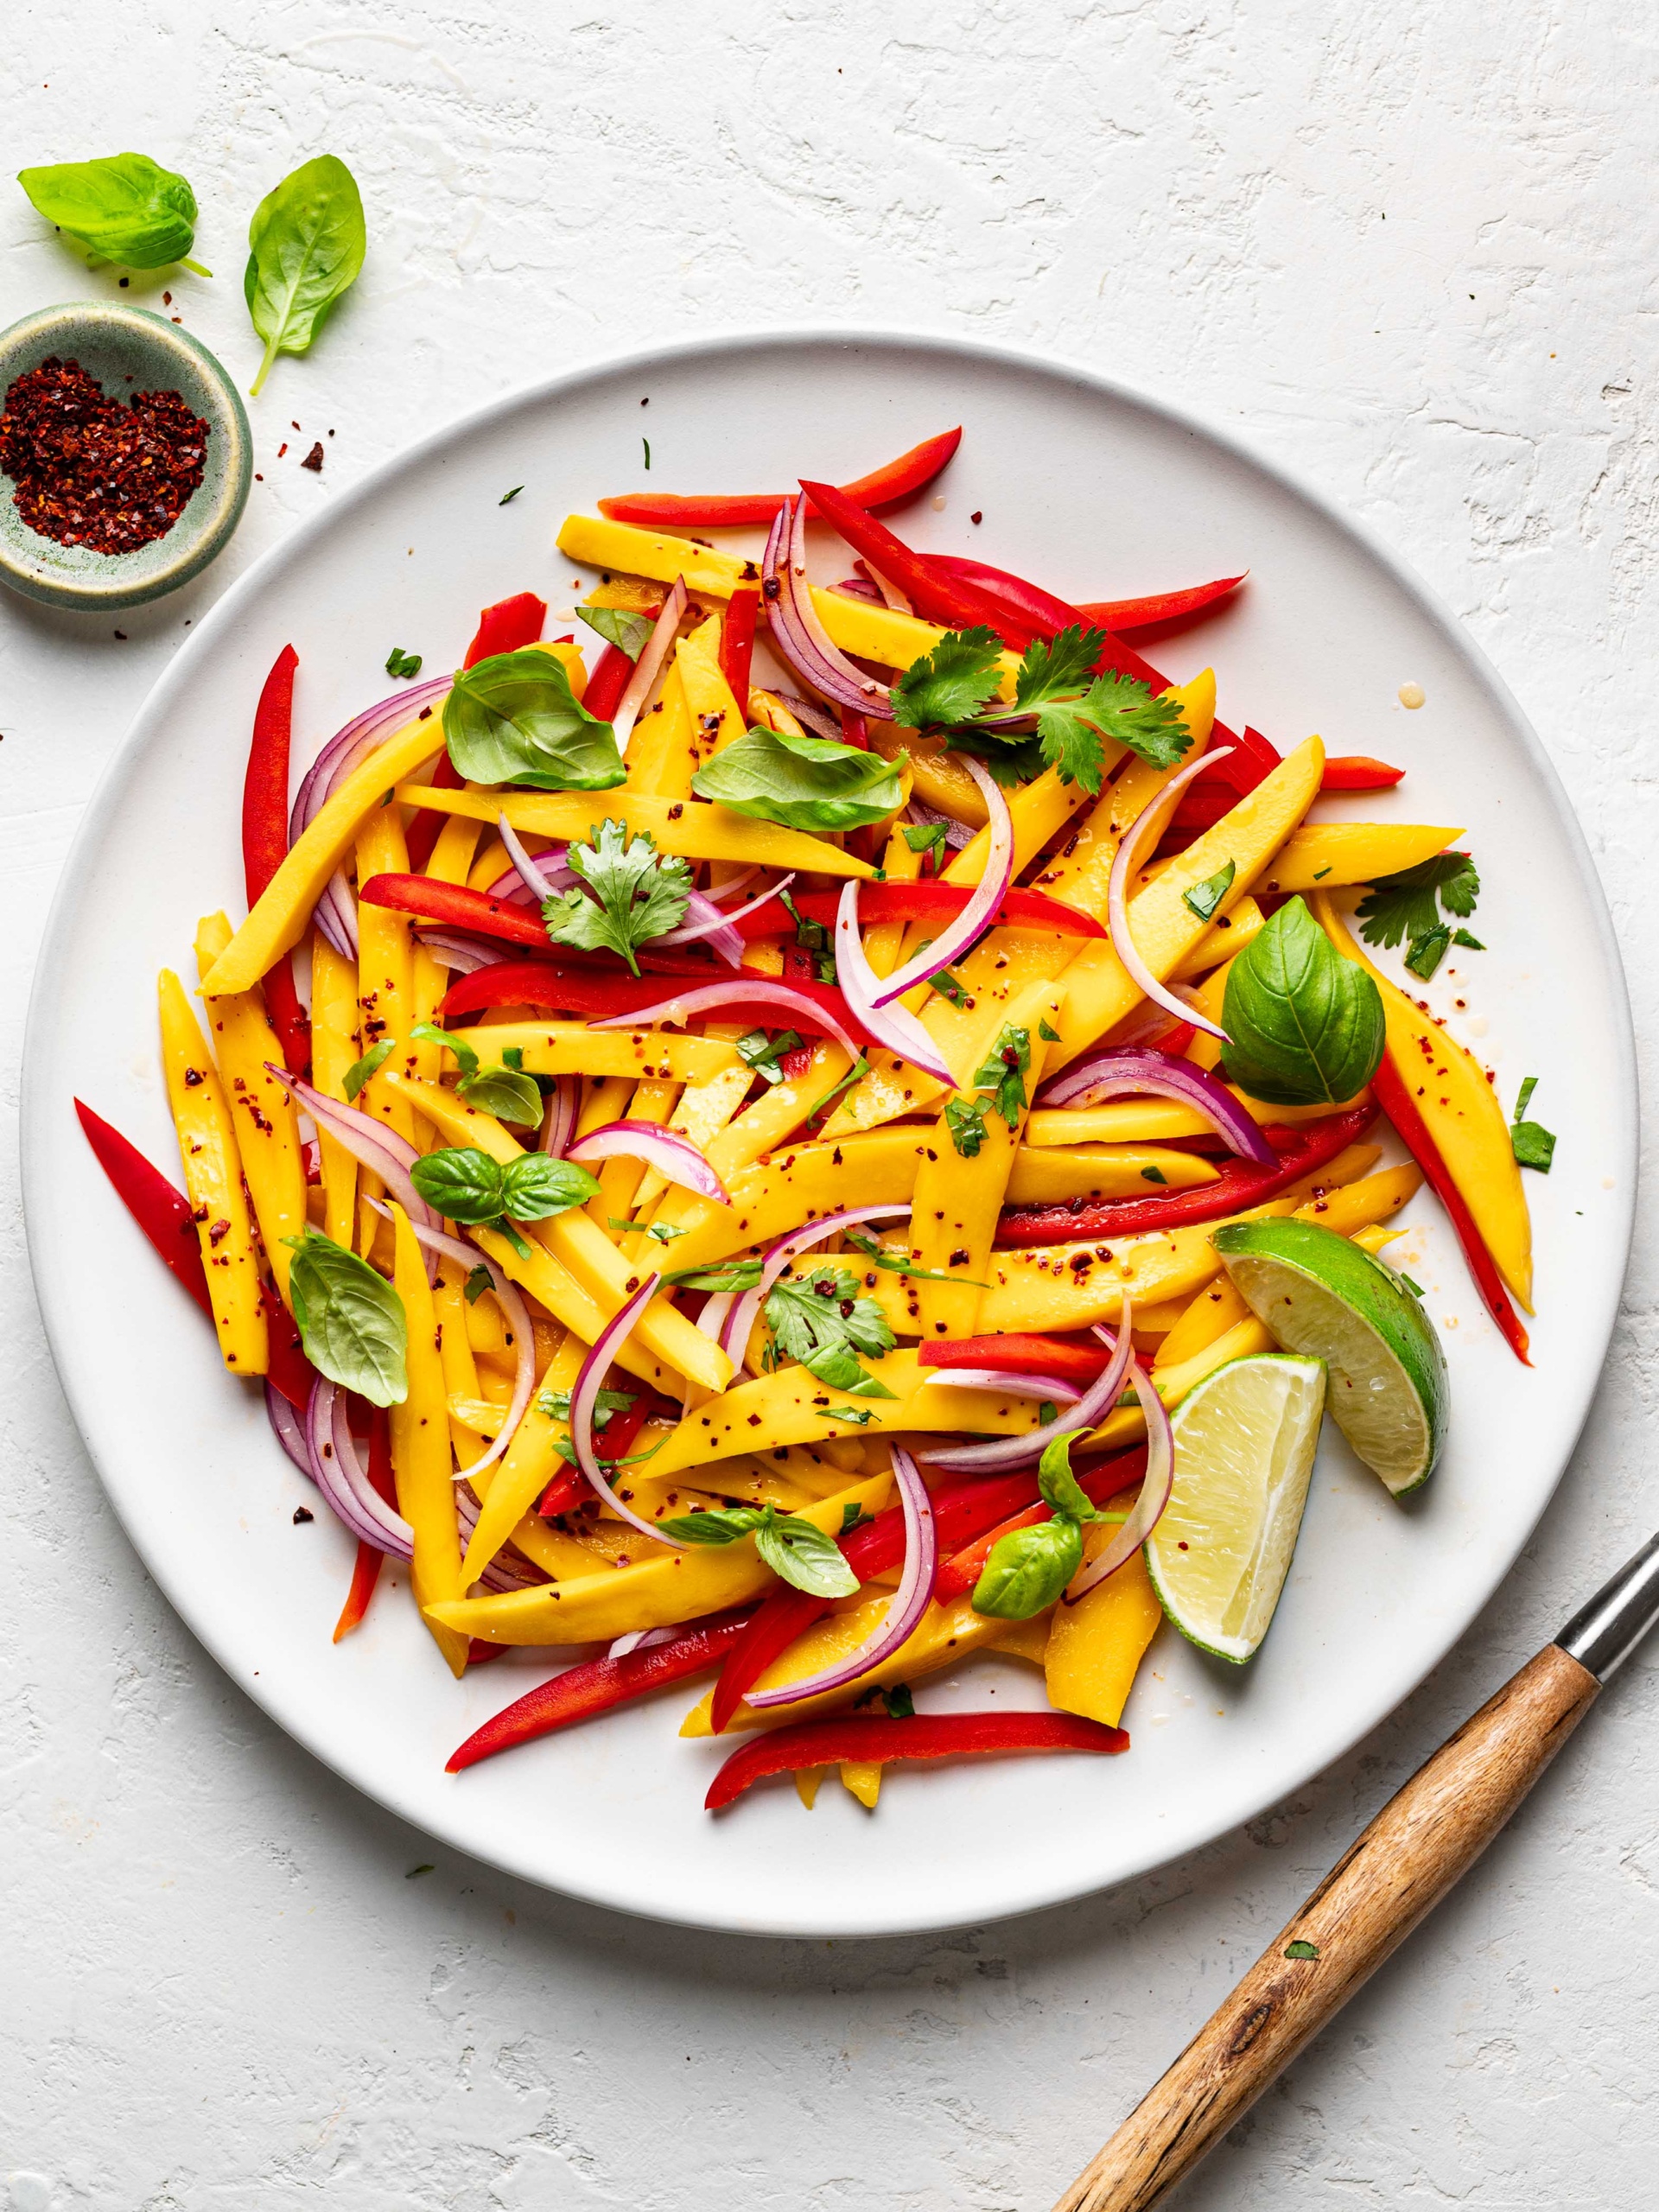 Mango salad served on white platter with small bowl of Aleppo pepper on the side